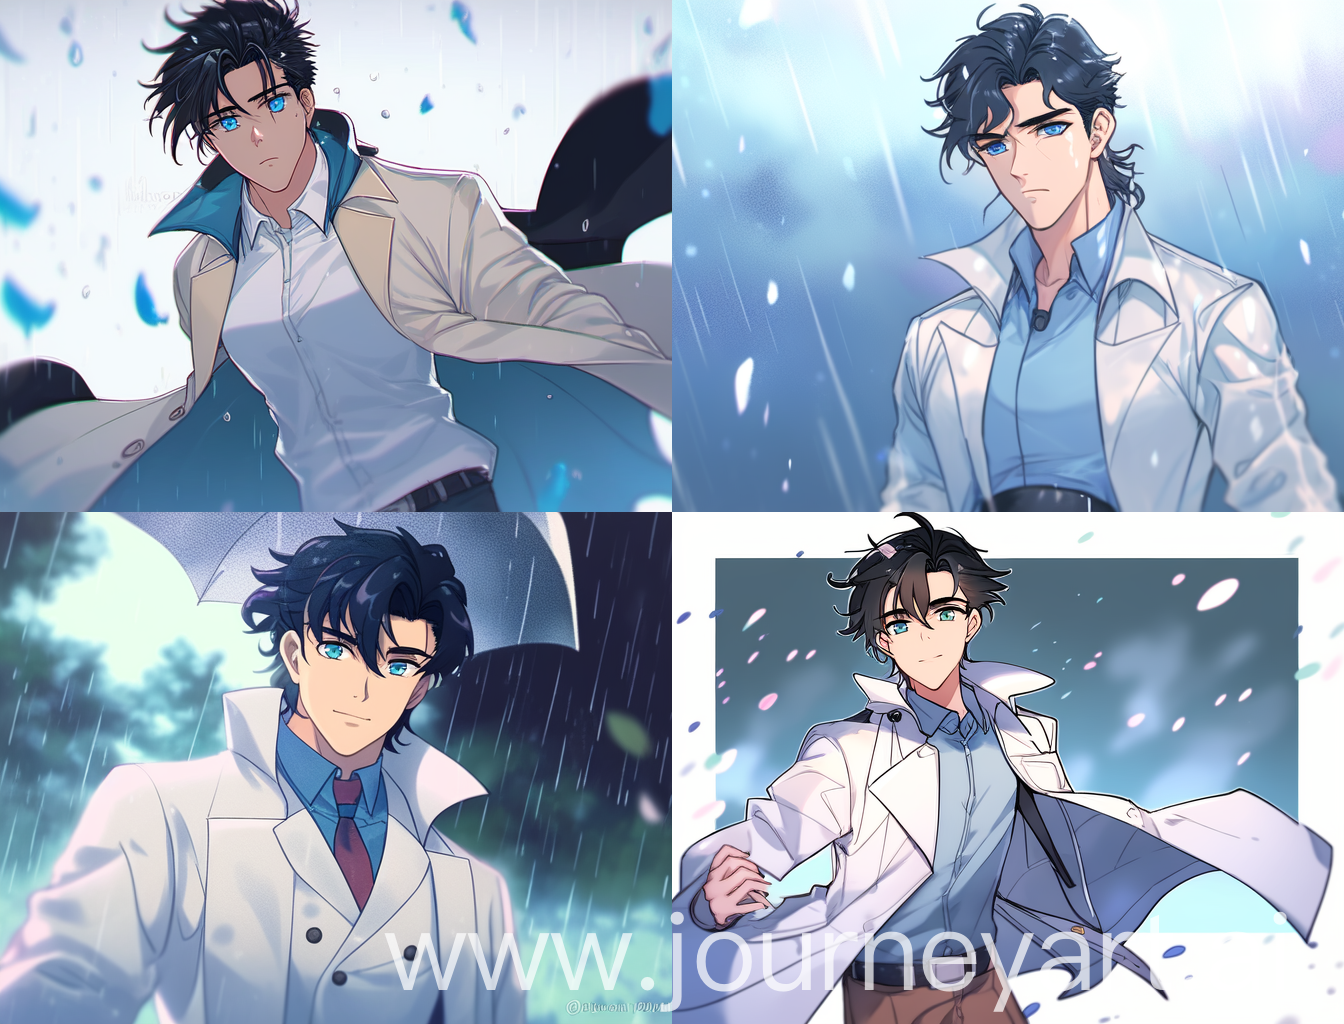 tall young man, slight heavy muscle, medium hair, black hair, parted hair, unique style hair, blue eyes, light blue raindrop necklace, white trench coat, black jacket, blue shirt